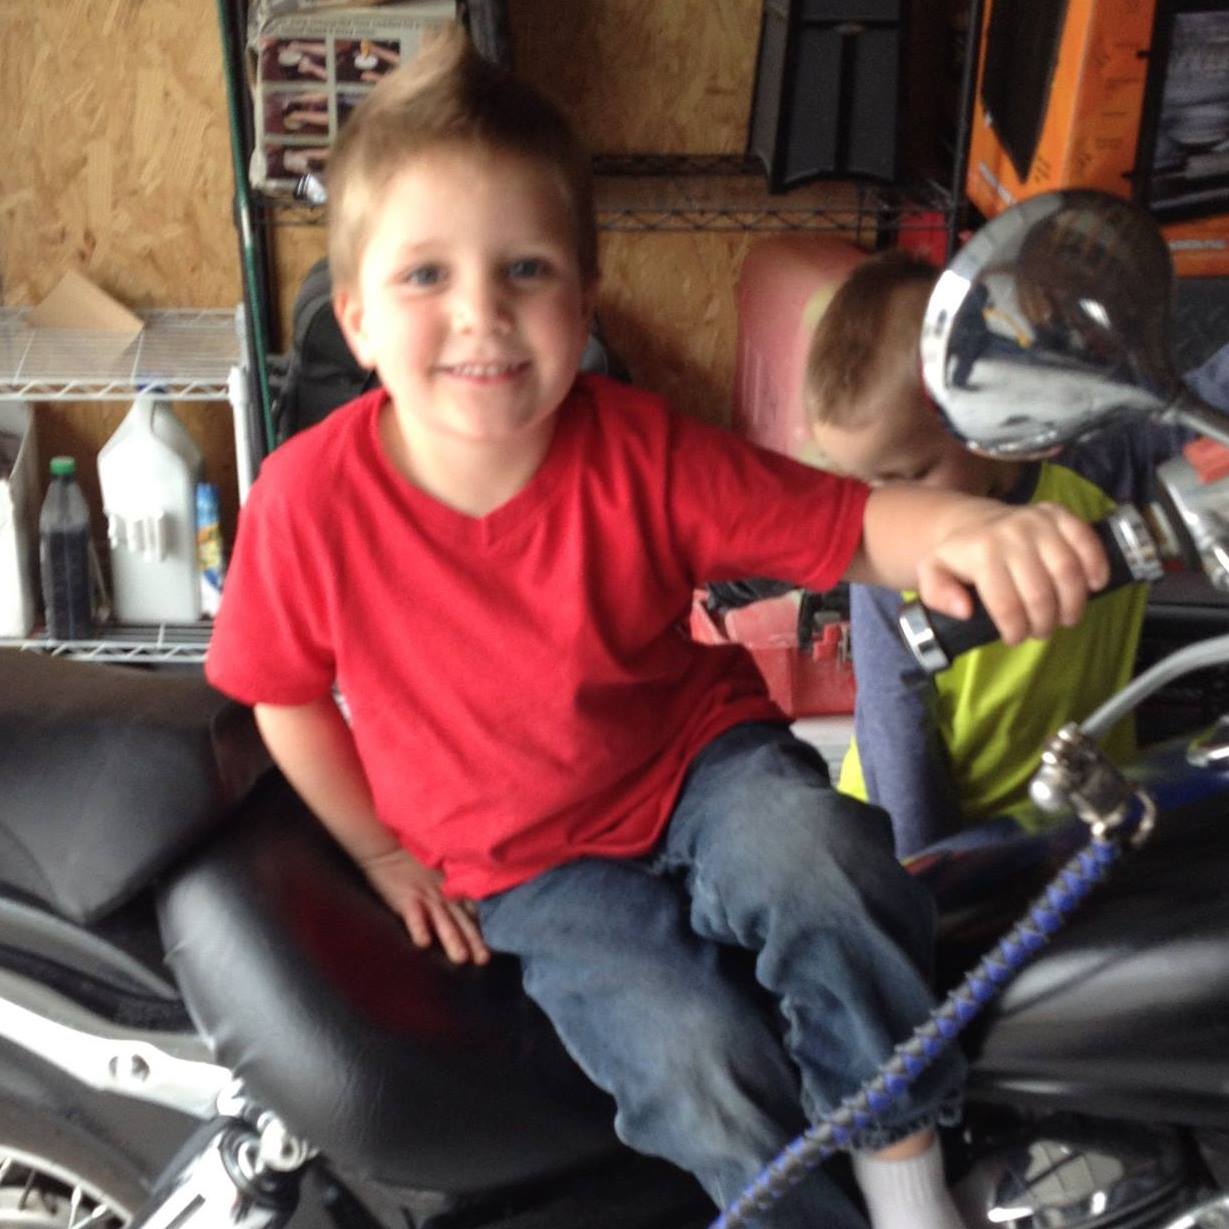 PHOTO: Thousands of motorcyclists came out on March 12, 2016, in Magna, Utah, to ride in a funeral procession for the death of 5-year-old Hunter Weiss. The young boy loved motorcycles.